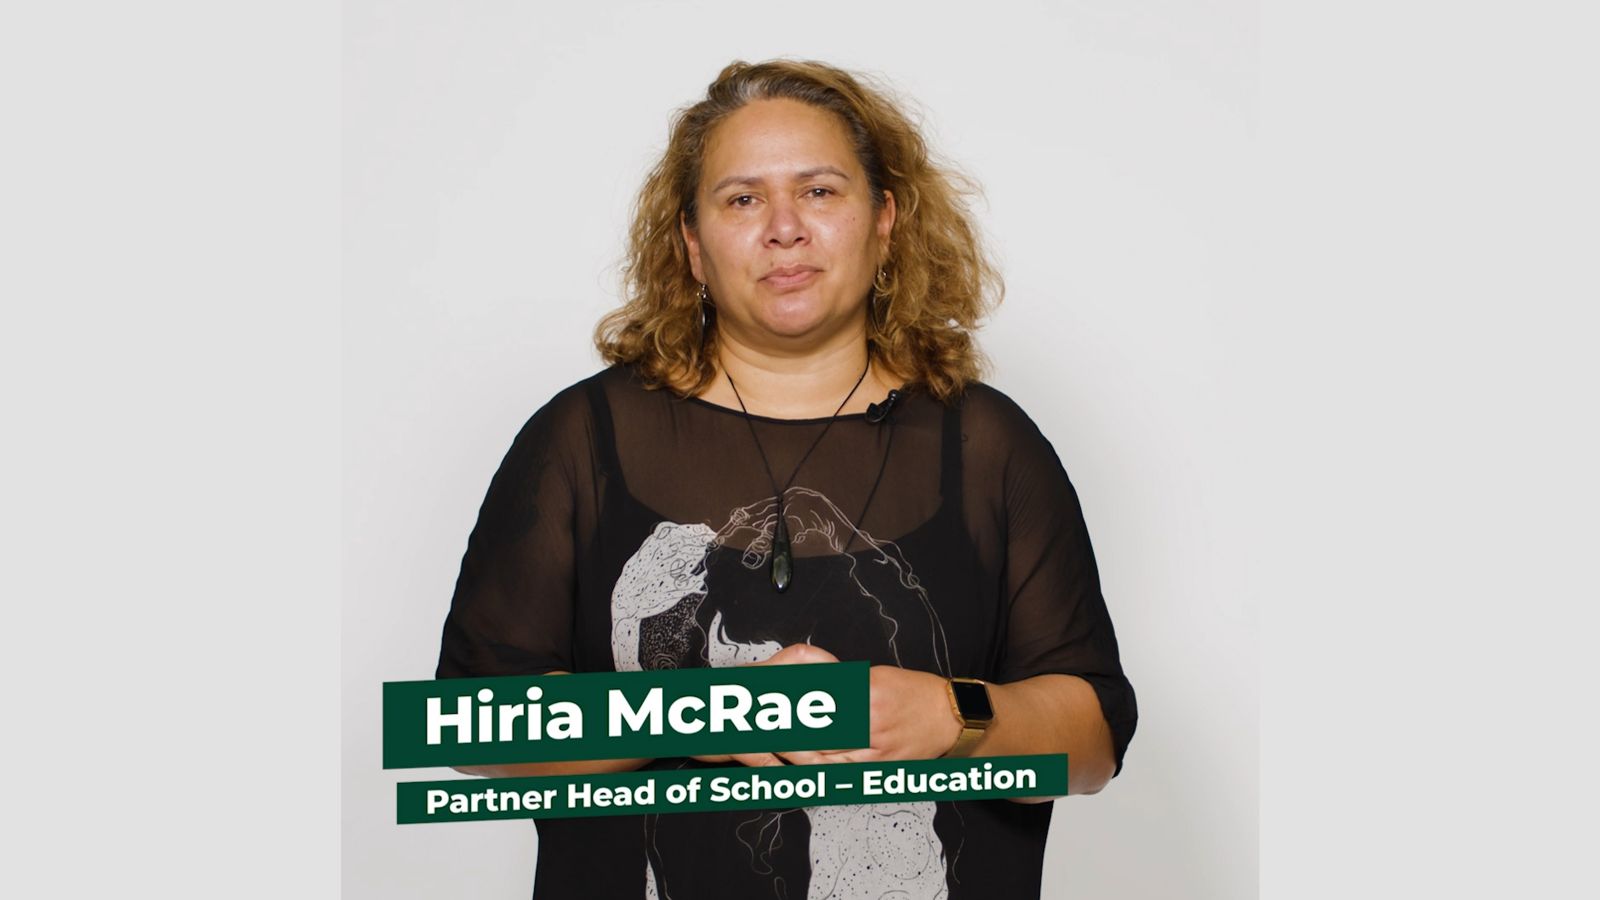 Partner Head of School Hiria McRae stands facing the camera against a white background